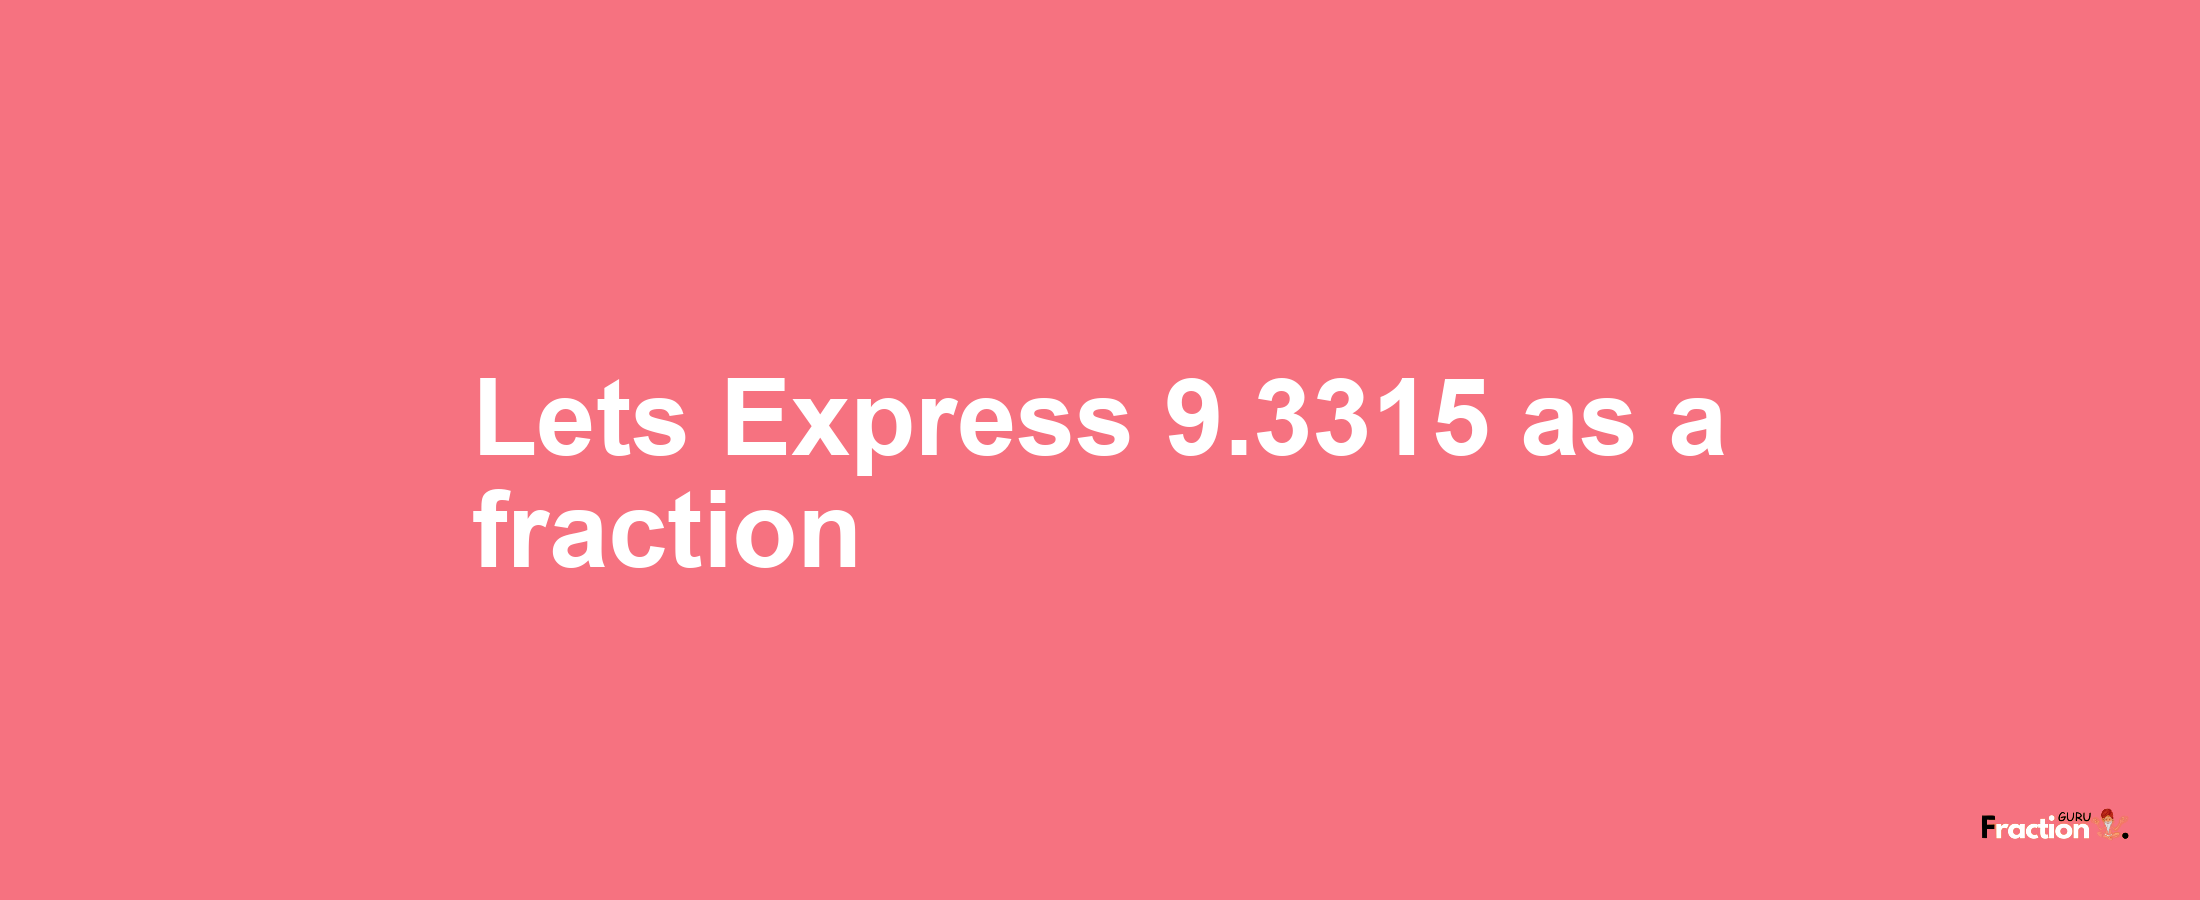 Lets Express 9.3315 as afraction